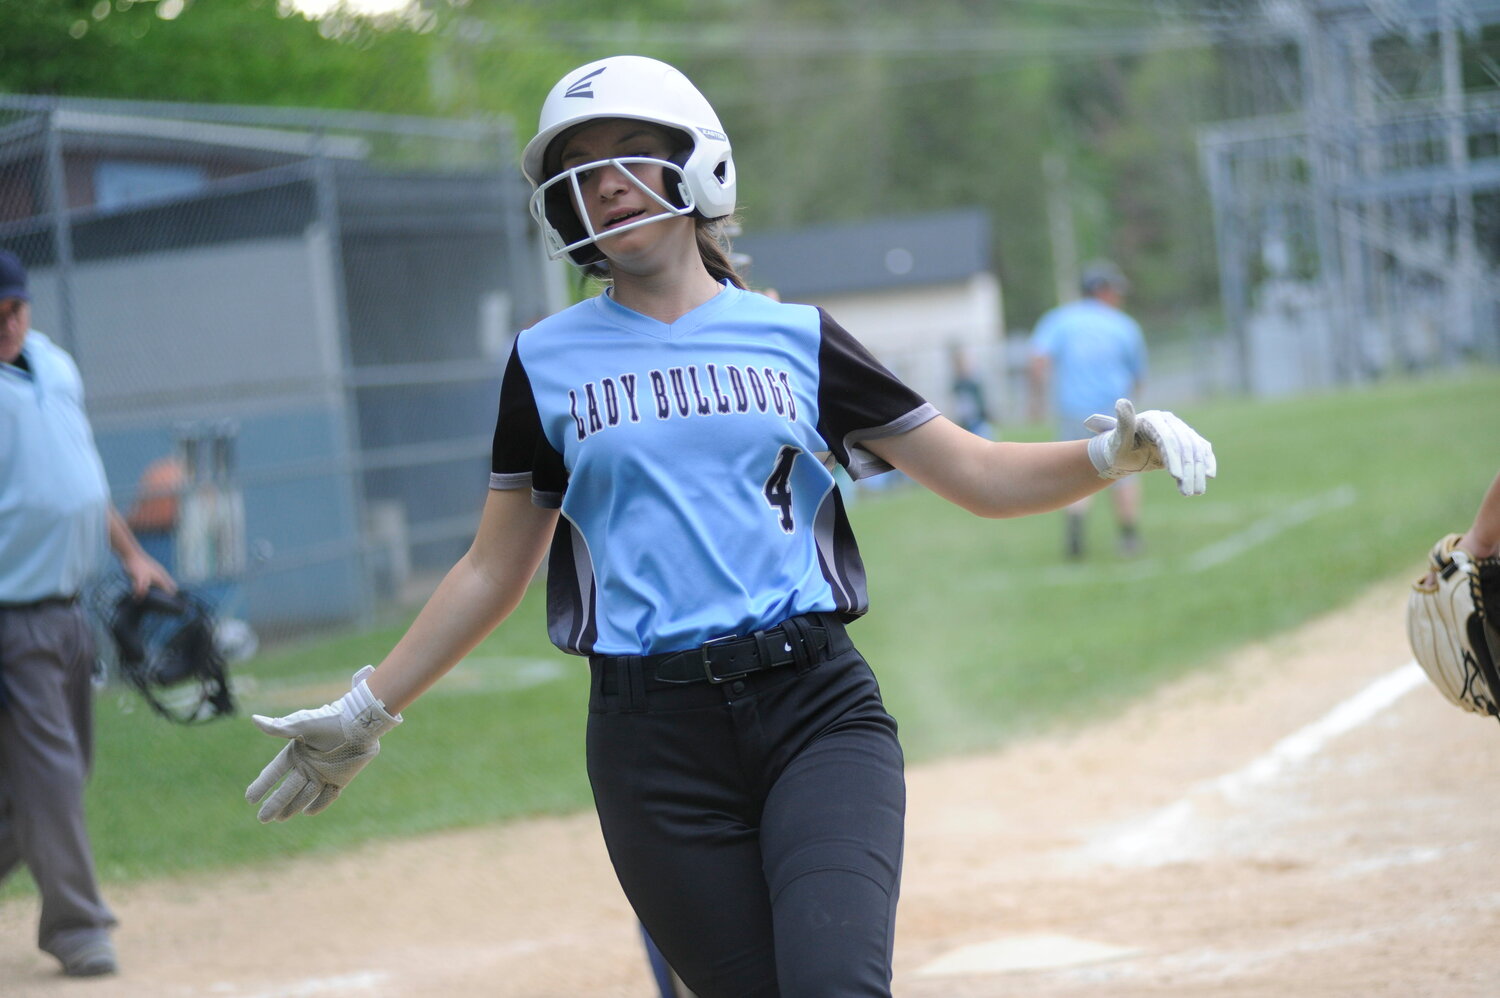 The winning run. Sullivan West’s Kaitlyn Drobysh scores the victory run in the bottom of the eighth, sending the Lady Bulldogs into Wednesday’s semi-sectionals against Pine Plains.